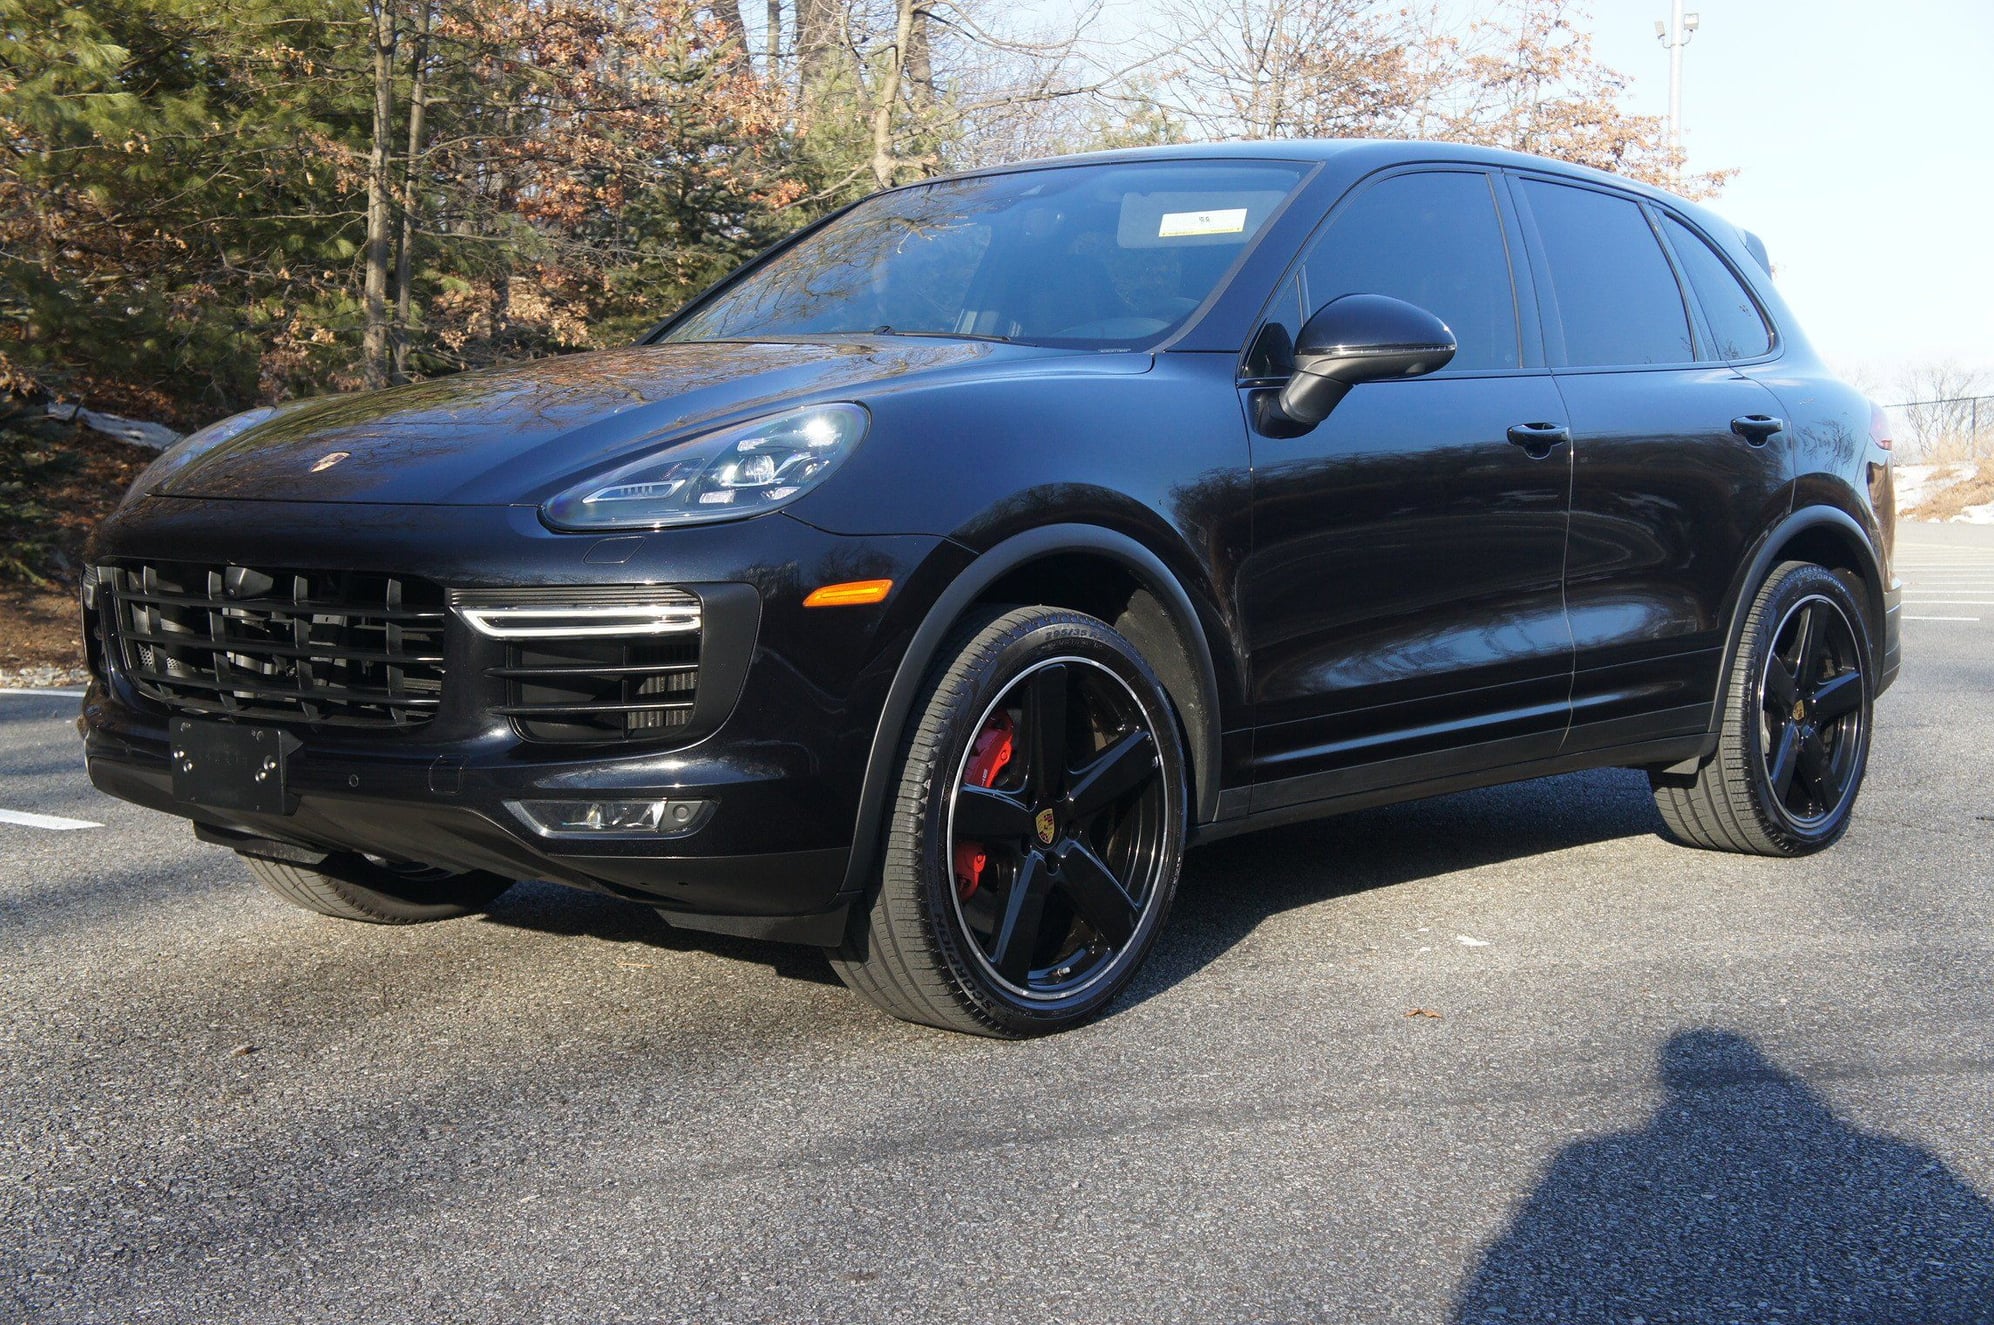 2018 Porsche Cayenne - 2018 PORSCHE CAYENNE TURBO **only 259 made** MSRP $135,660 - Used - VIN 00000000000000001 - 36,200 Miles - 8 cyl - AWD - Automatic - SUV - Black - Parsippany, NJ 07054, United States